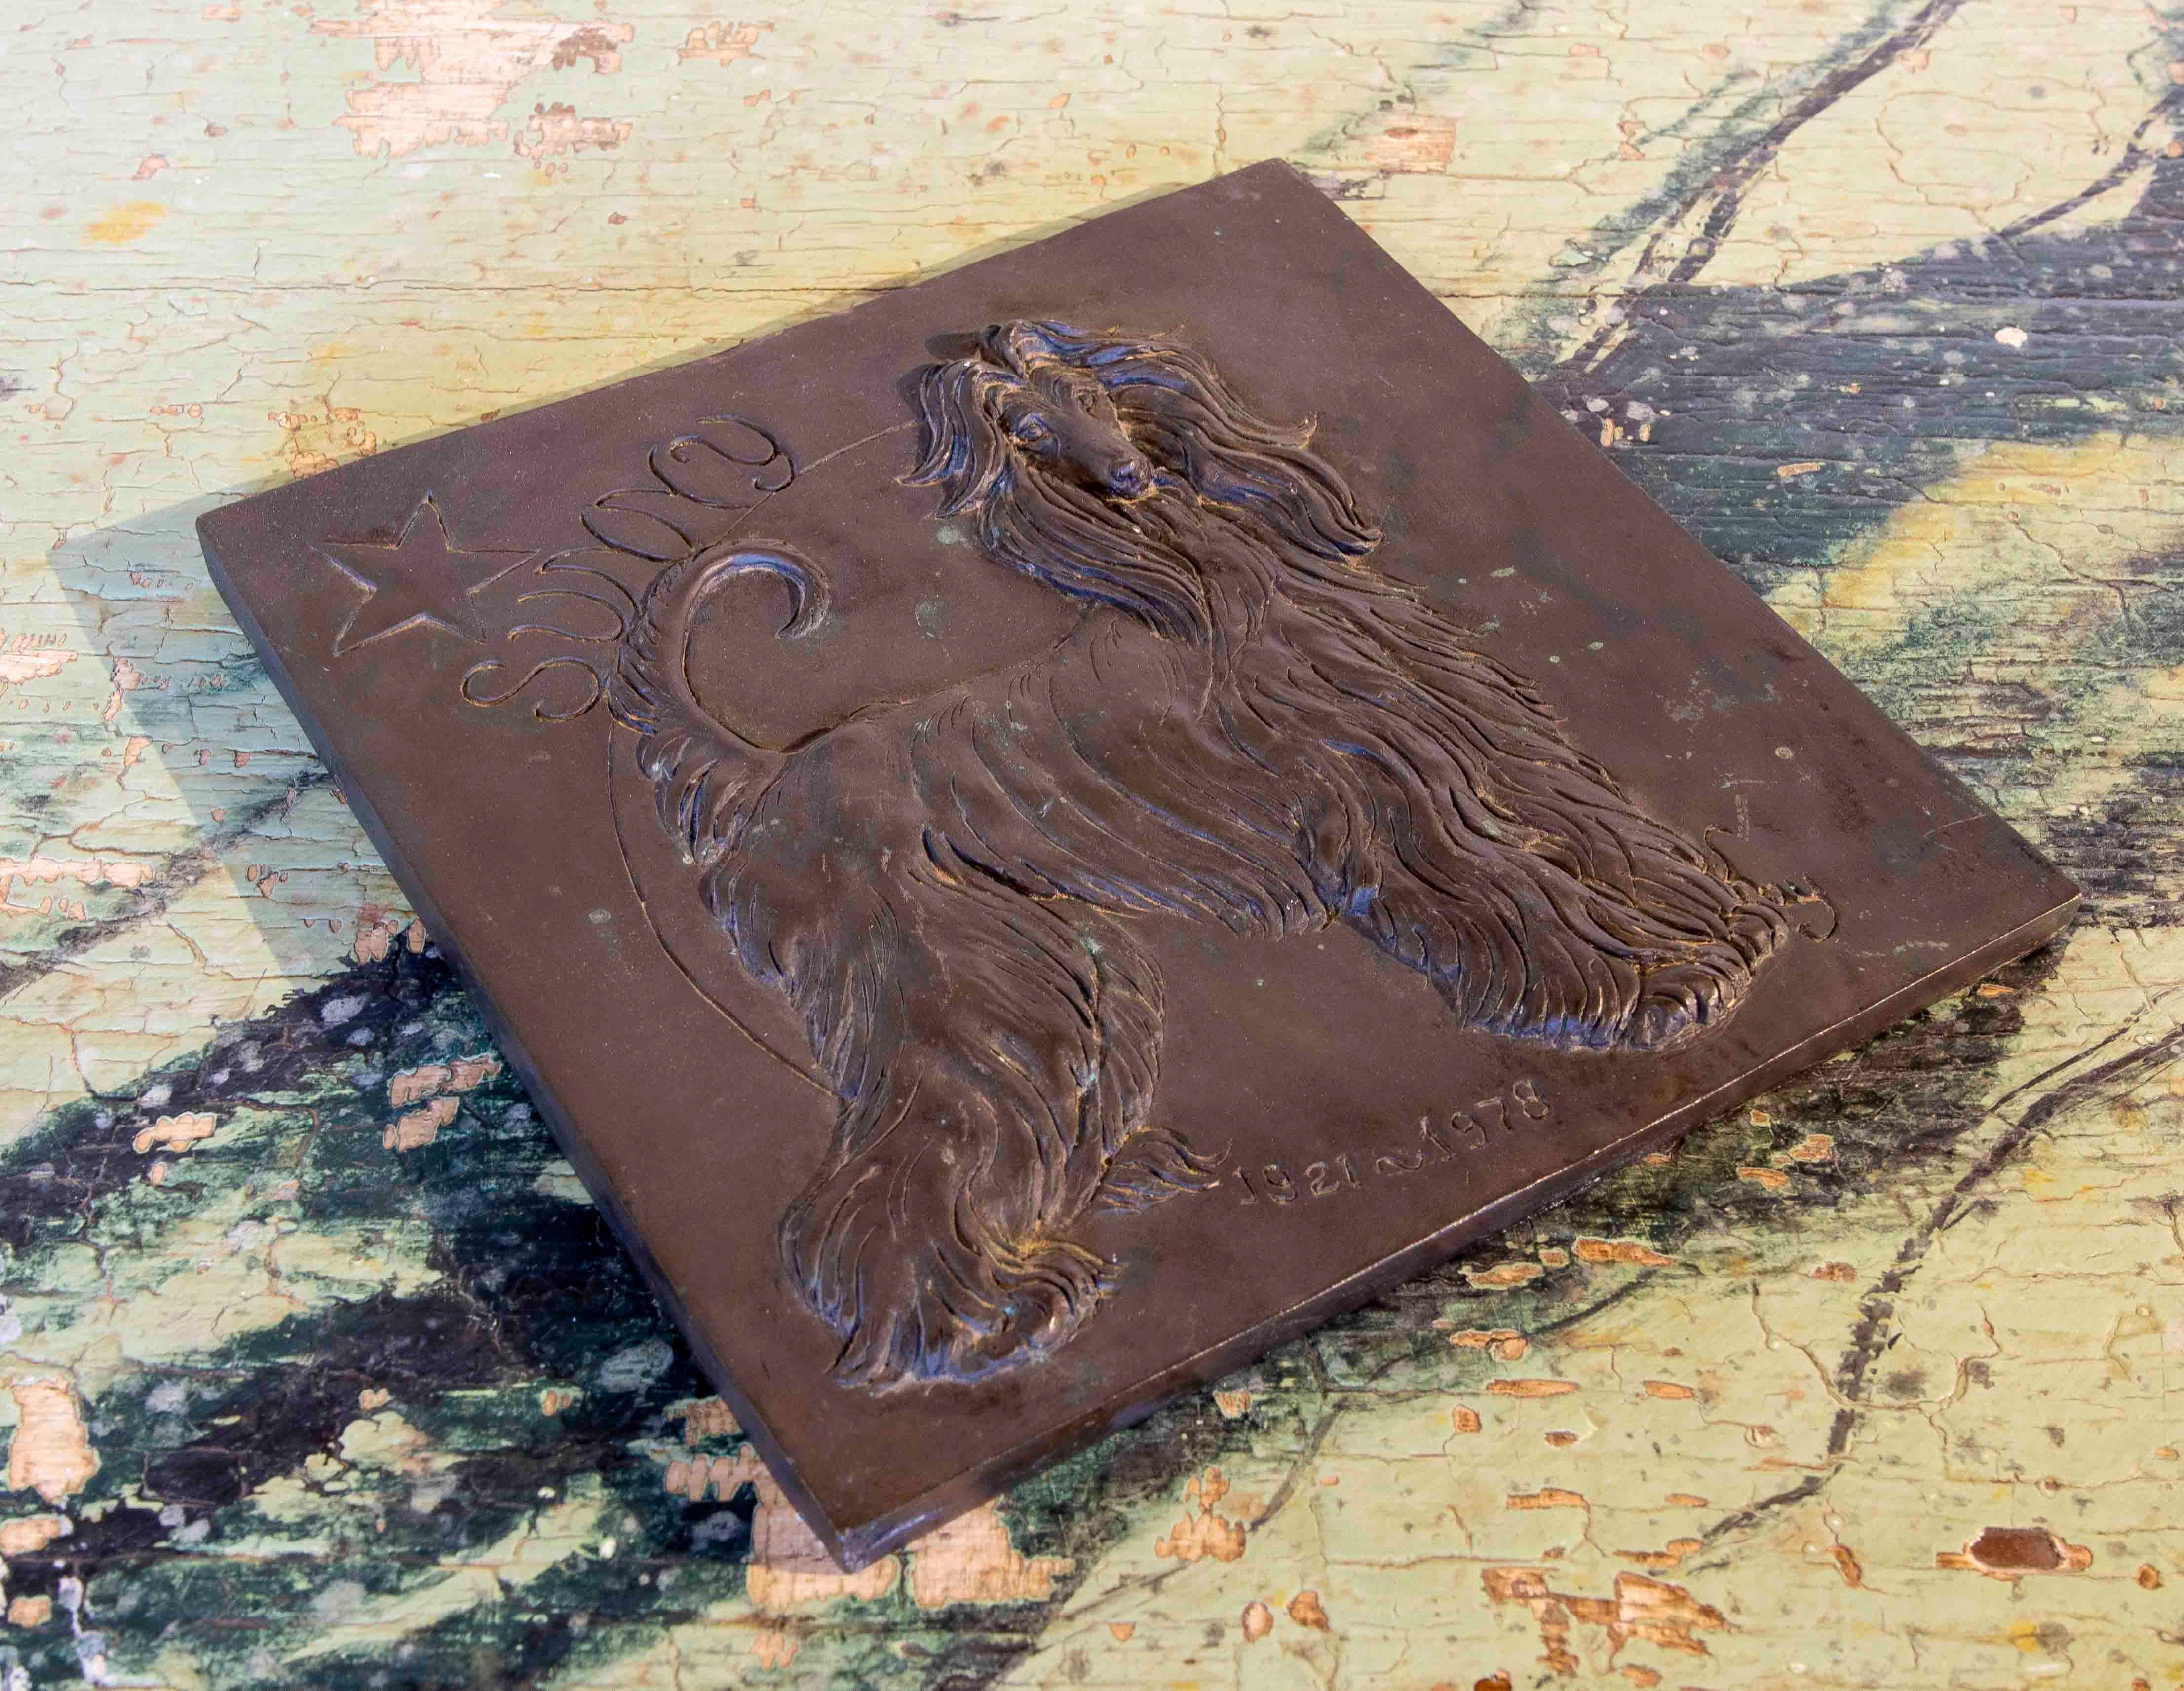 Signed Bronze Commemorative Plaque with Image of Dog and 